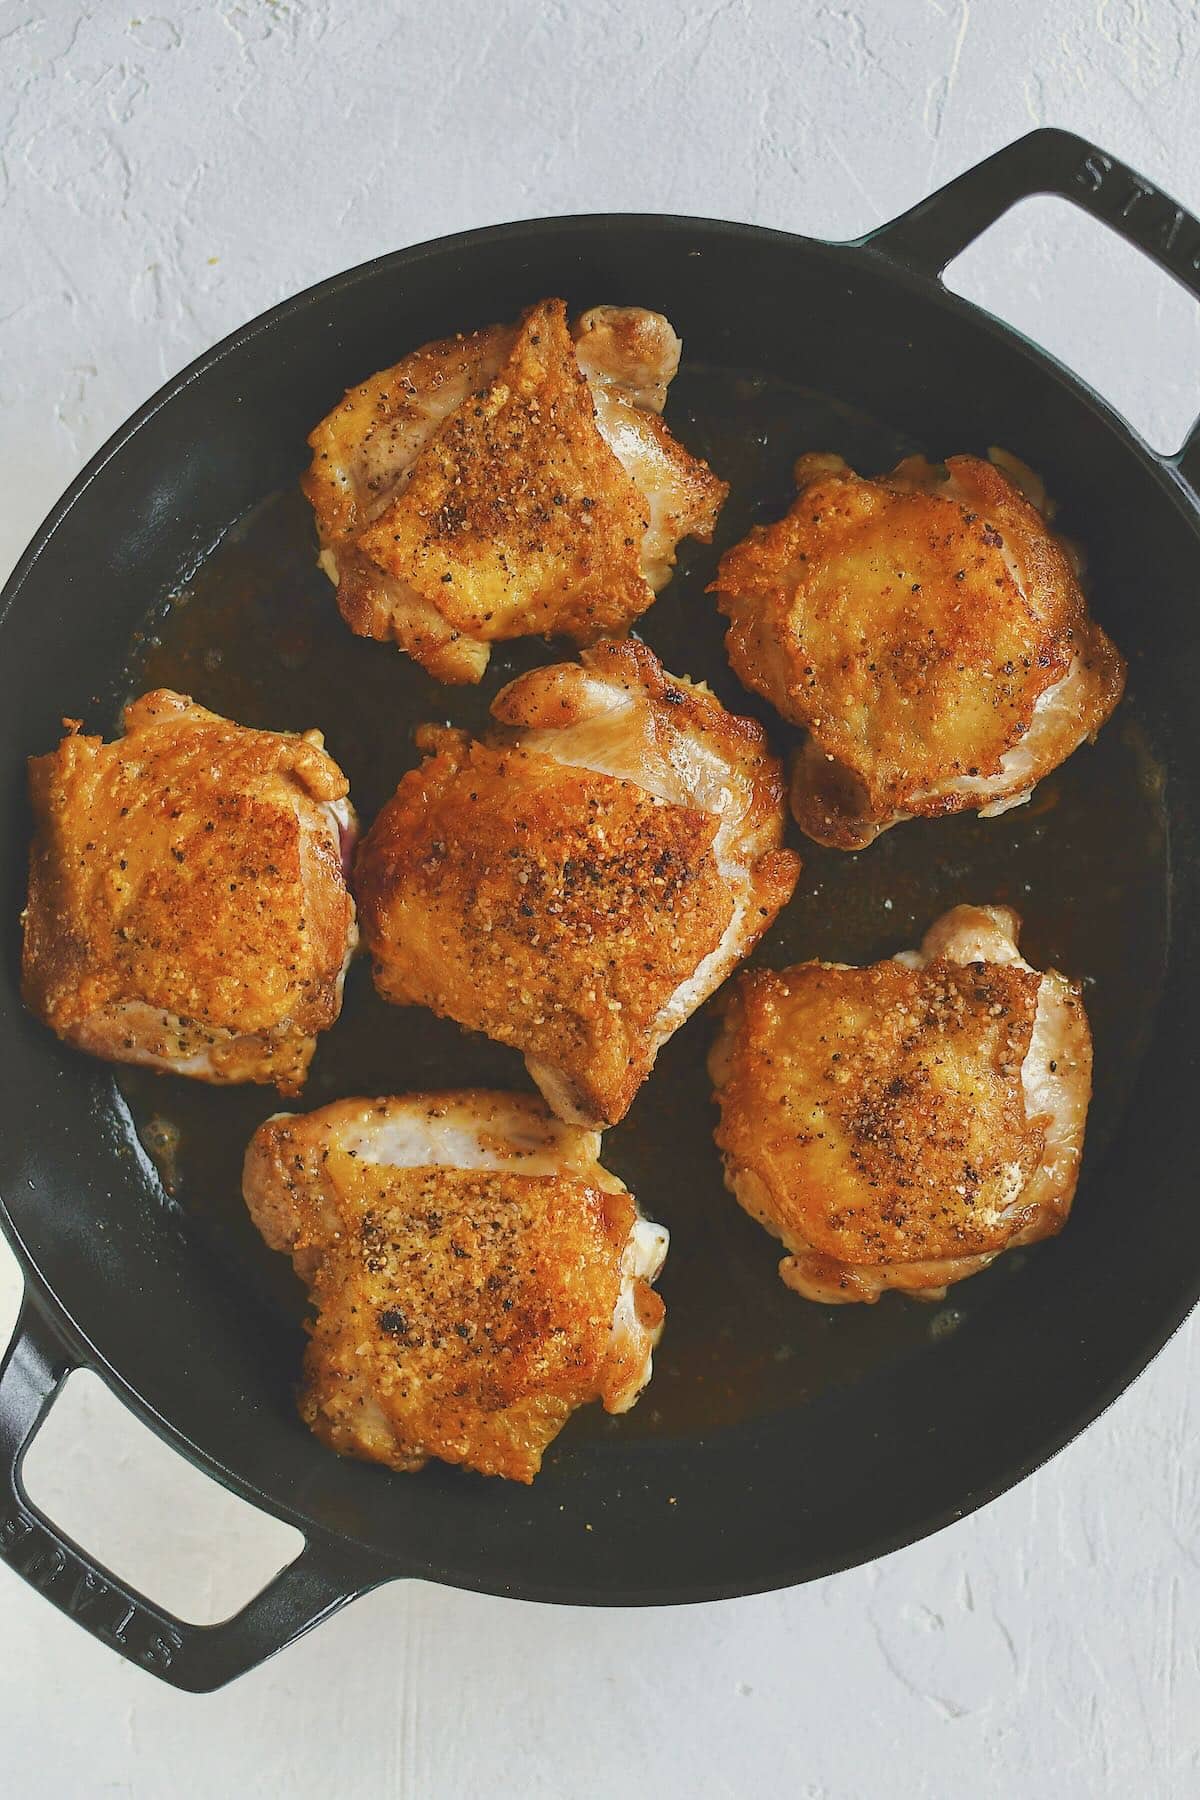 Perfectly crisped chicken thighs in a large skillet.